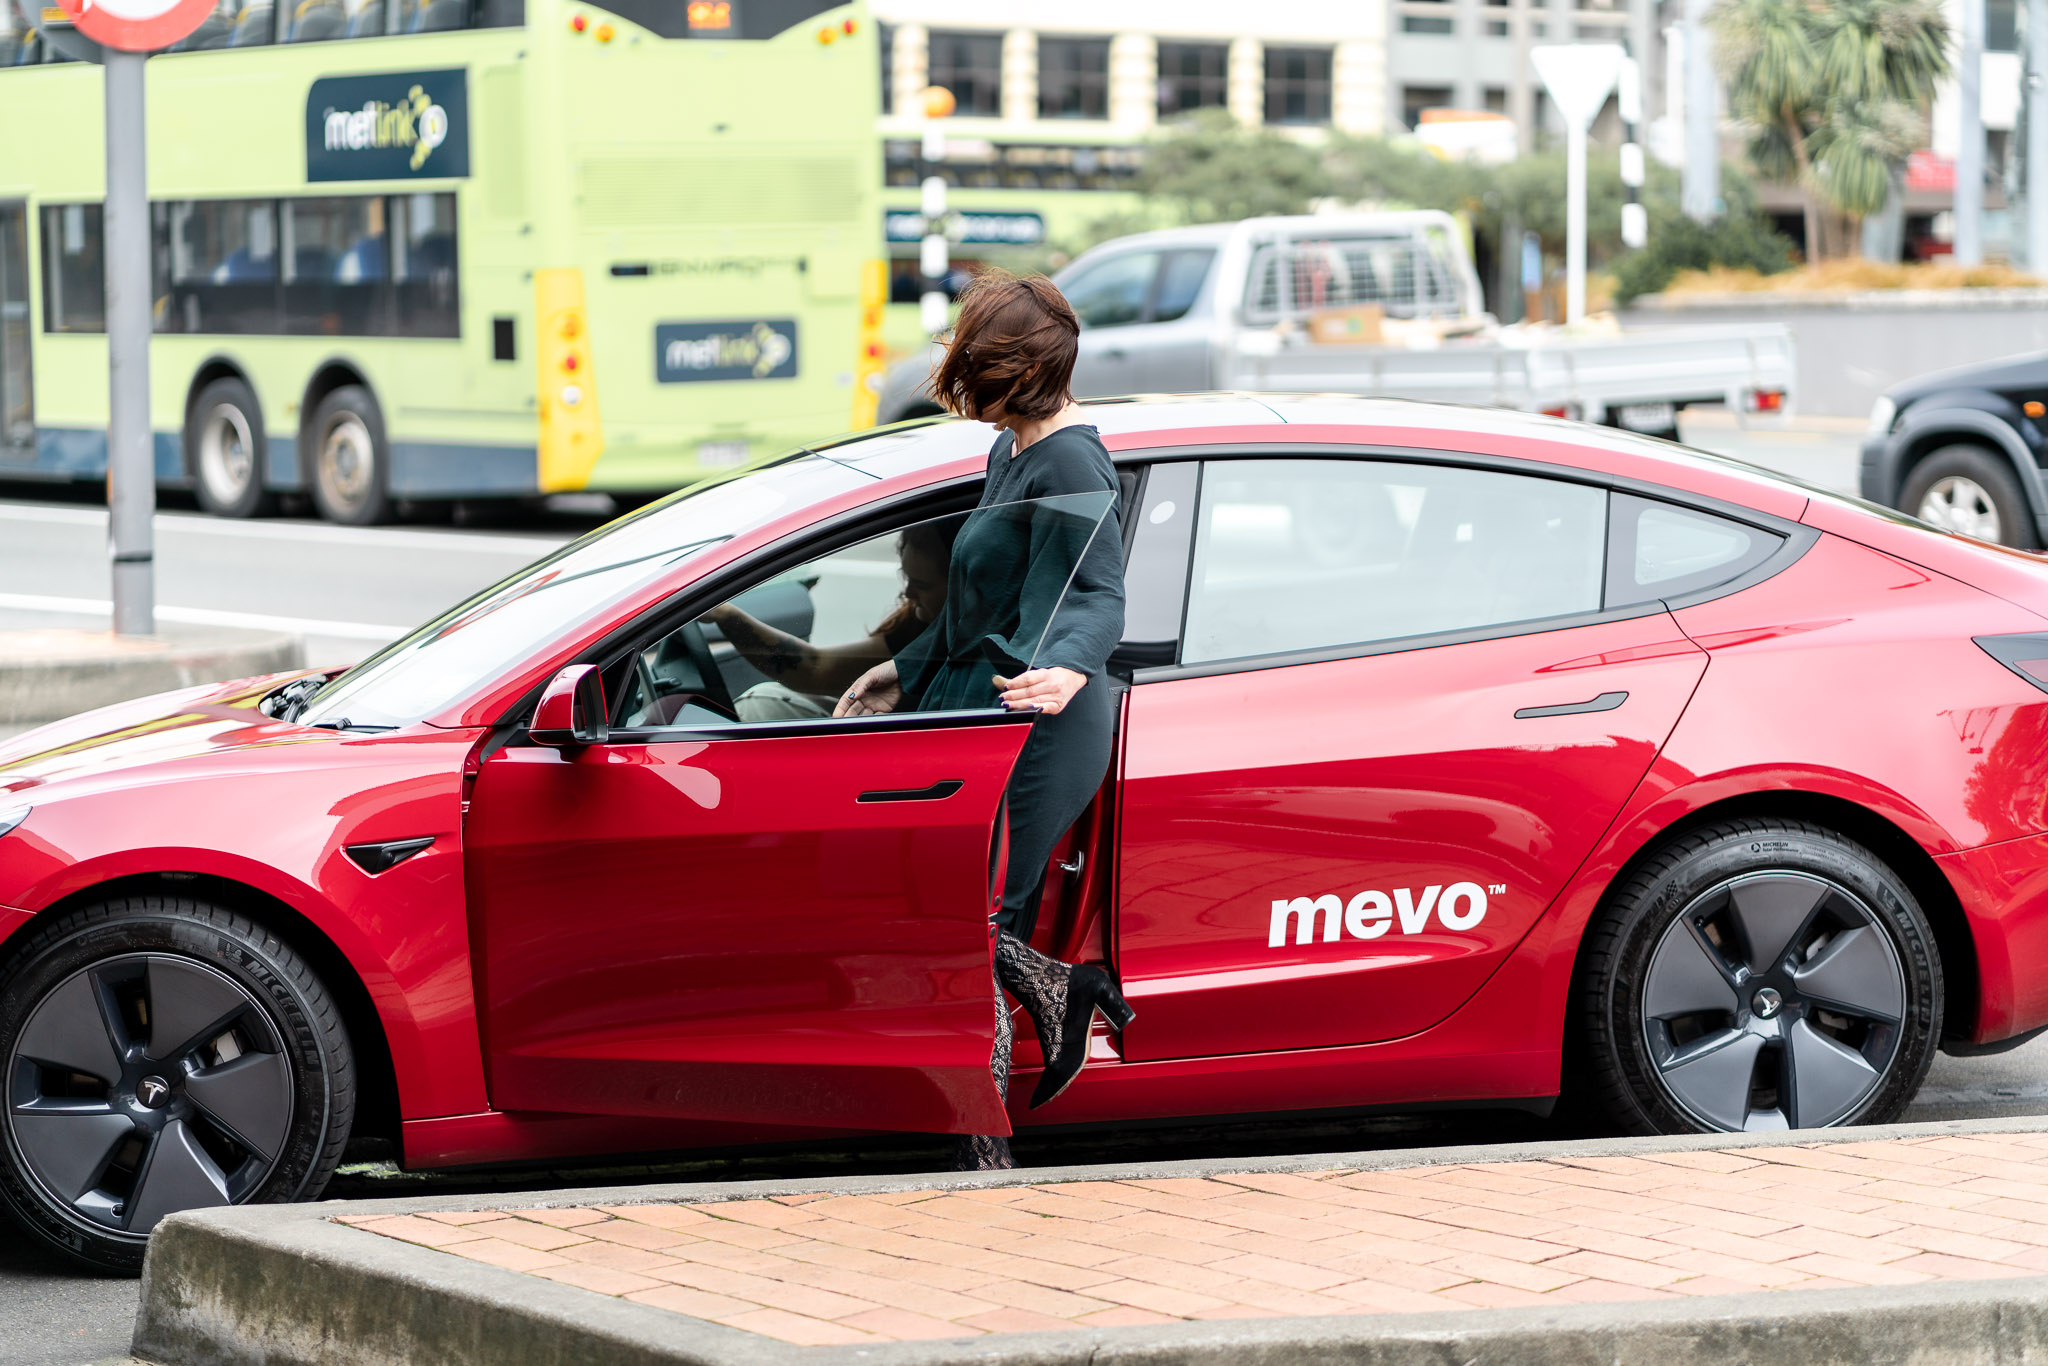 Two of the Copo Property Management team getting into a Mevo vehicle on Courtenay Place, Wellington.